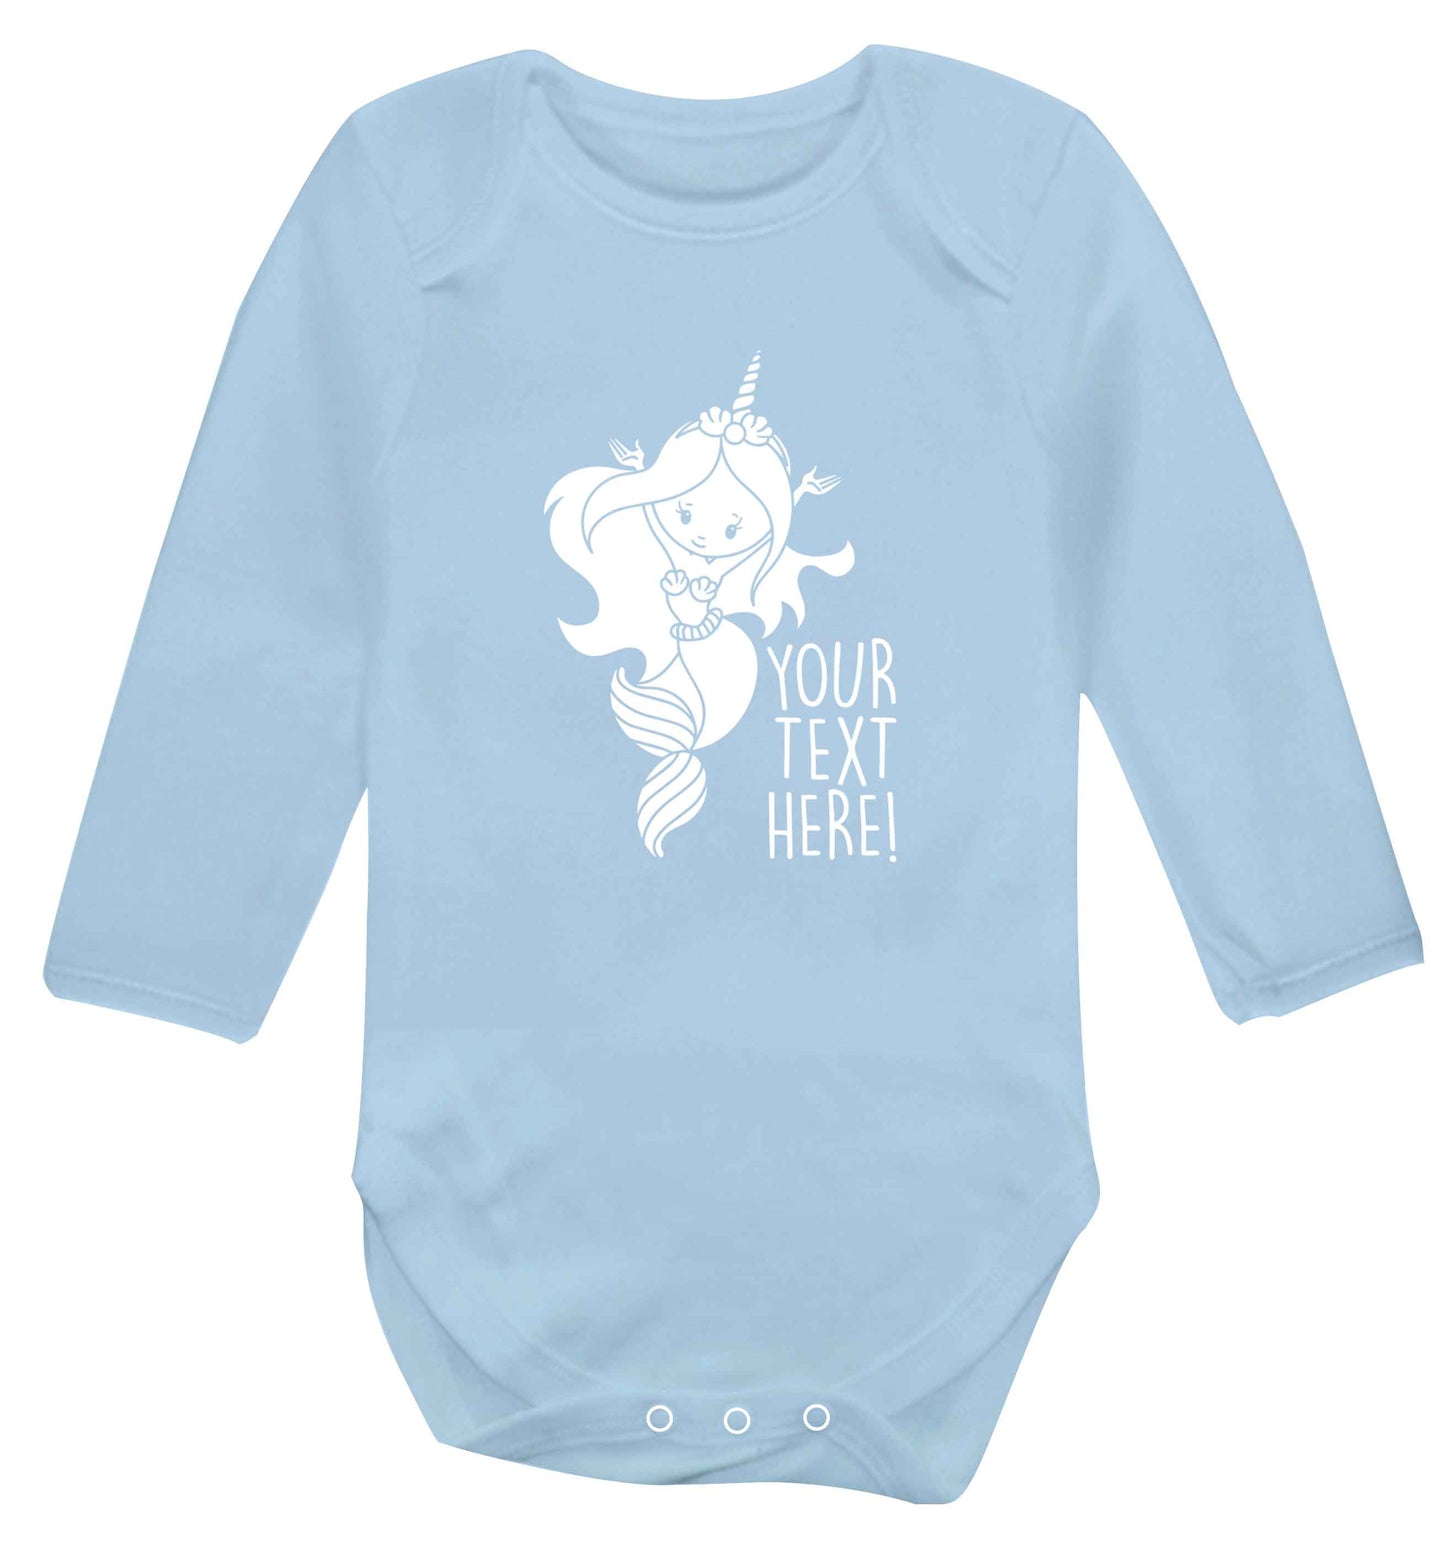 Mermaid with unicorn headband any text baby vest long sleeved pale blue 6-12 months